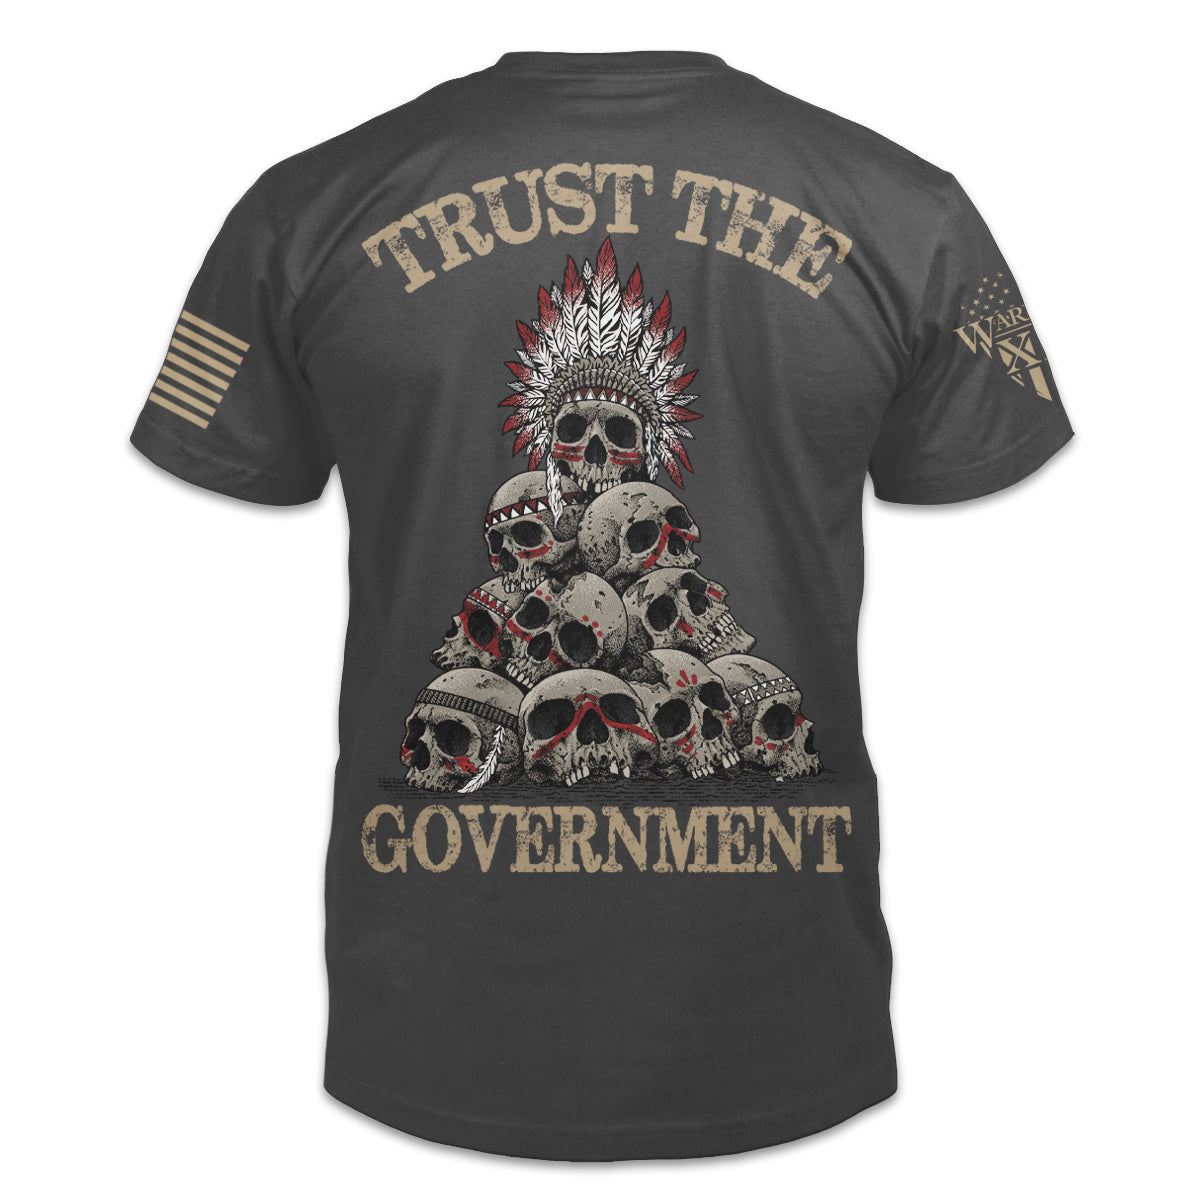 A dark grey t-shirt with the words "Trust the government" printed on the back of the shirt.